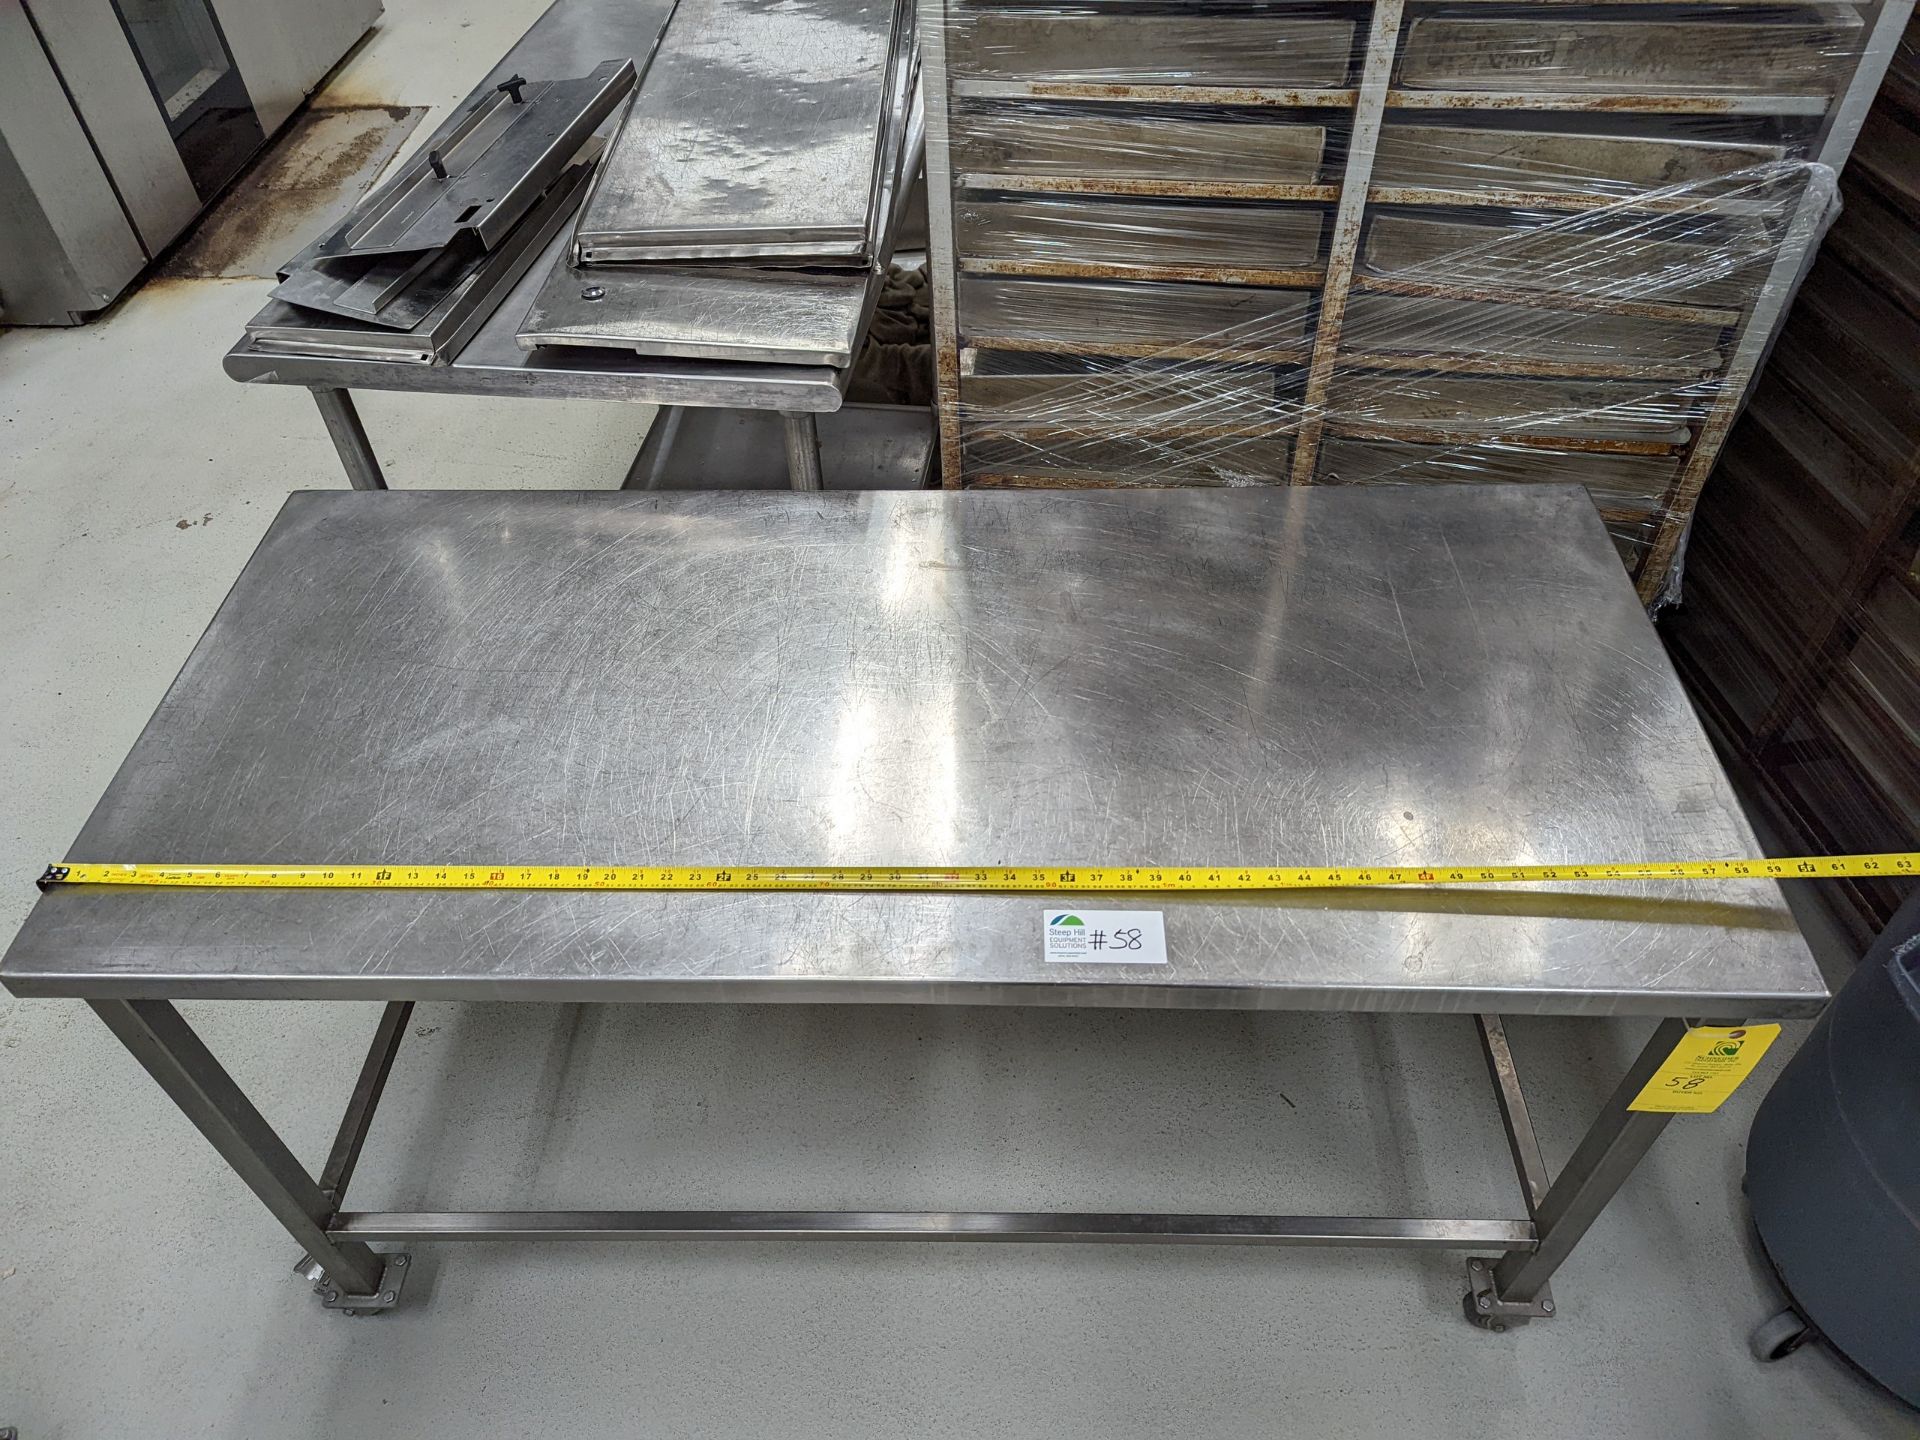 Stainless Table on castor wheels, 60Lx27Wx34H - Image 3 of 4